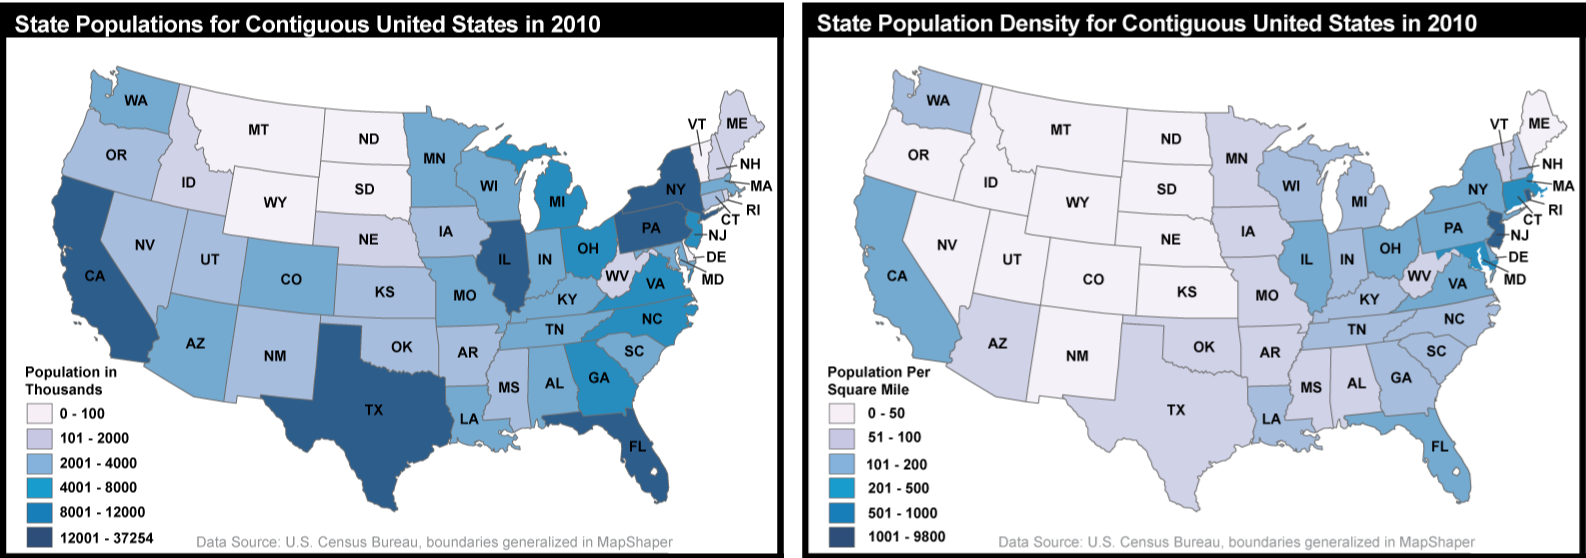 Total population count by state & population density by state. General: greater population = smaller population per sq mile